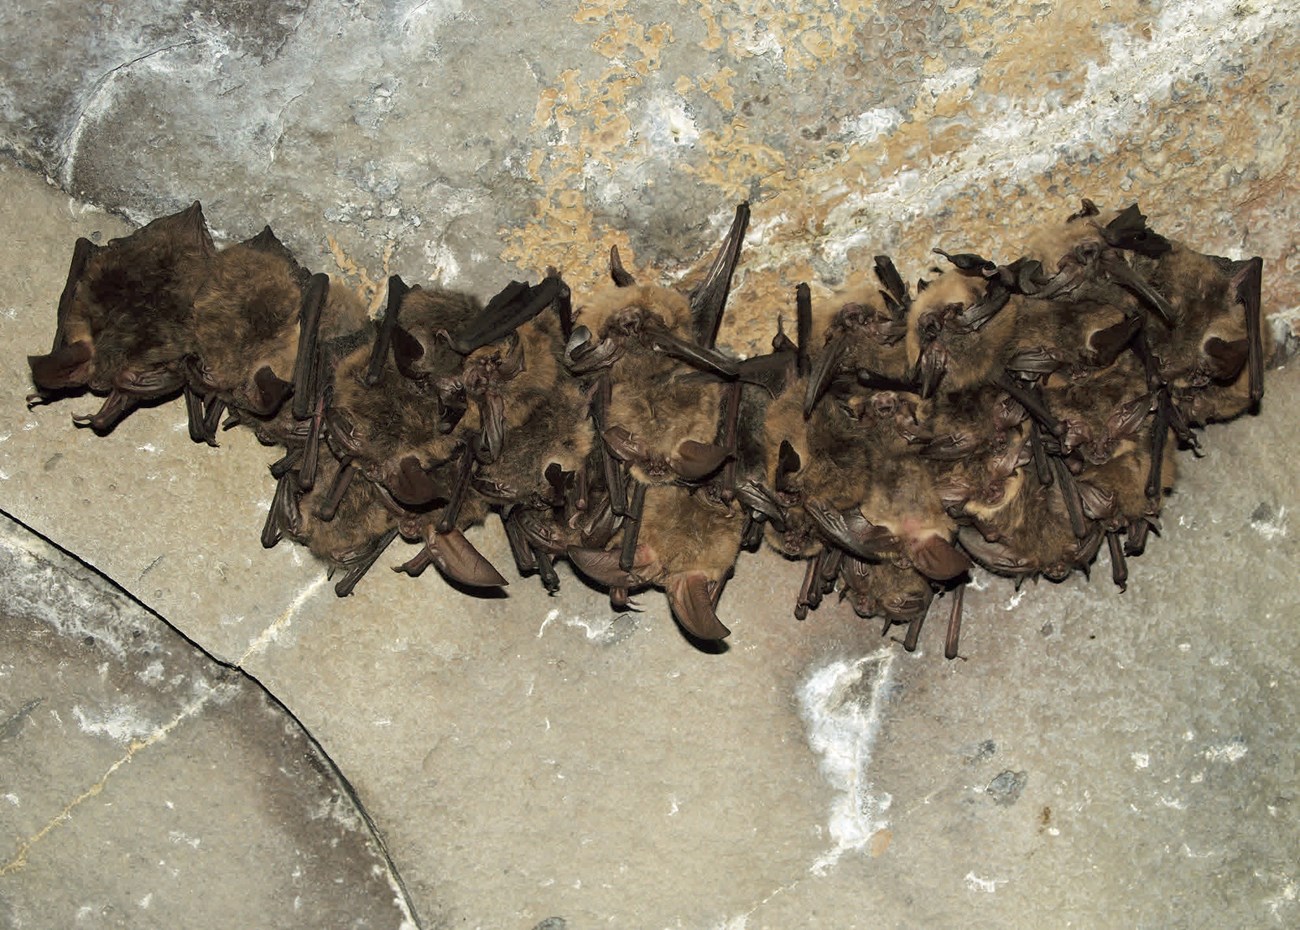 Bats in Caves (. National Park Service)